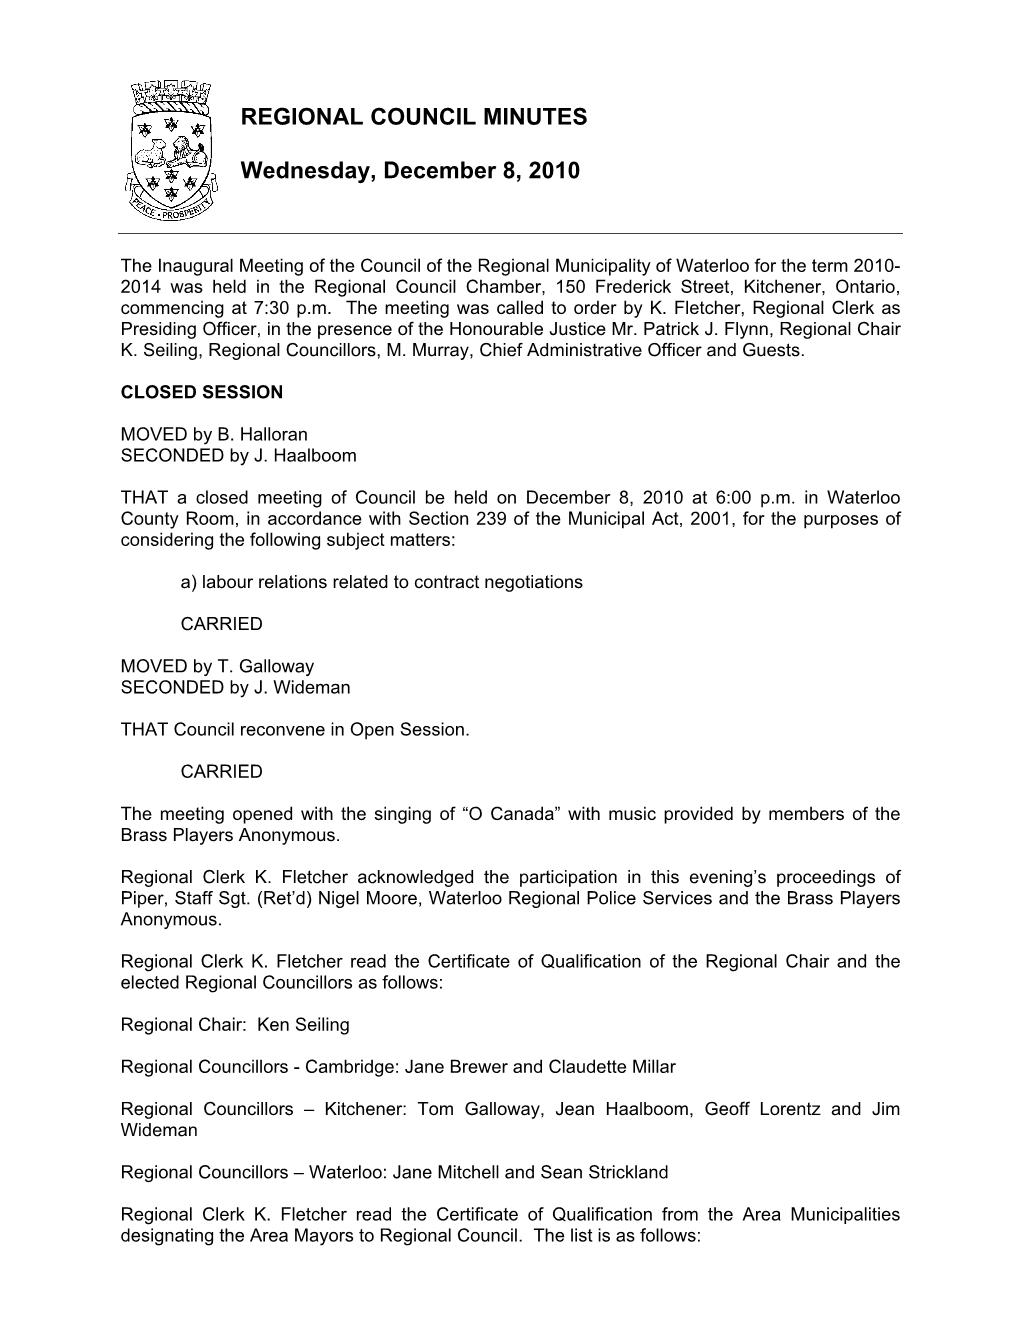 REGIONAL COUNCIL MINUTES Wednesday, December 8, 2010